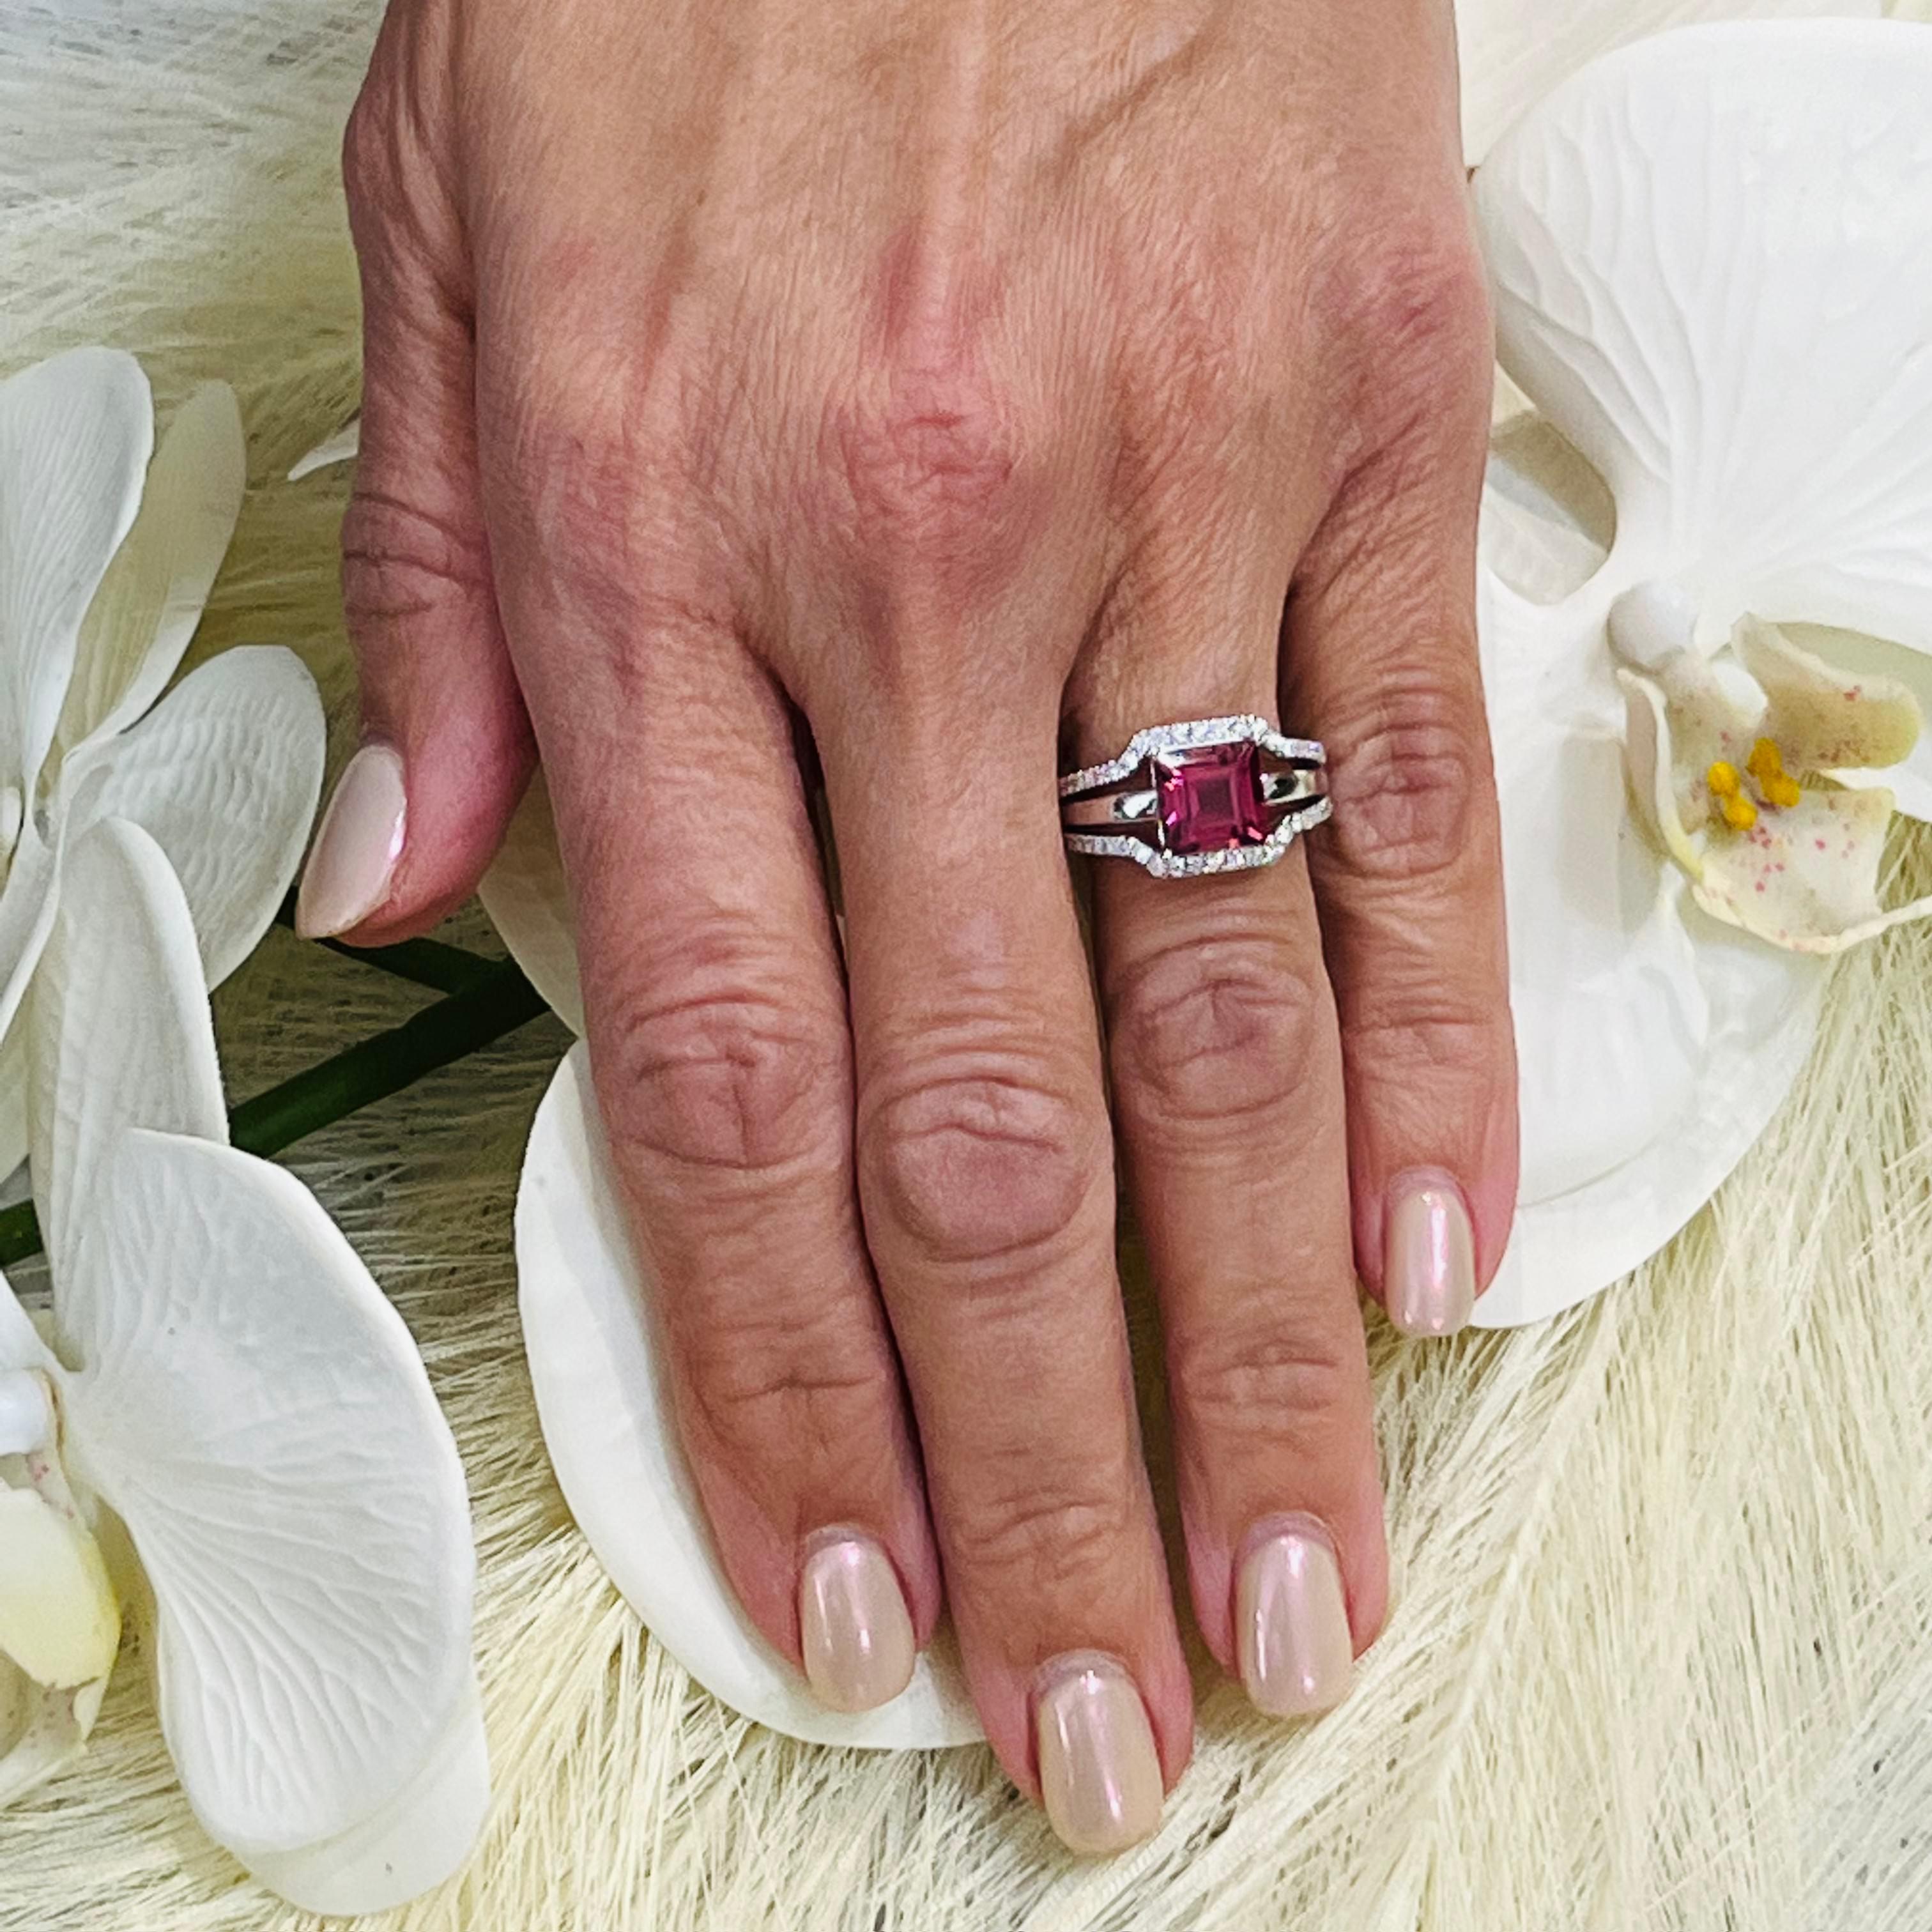 Natural Tourmaline Diamond Ring Size 6.5 14k W Gold 3.24 TCW Certified $3,950 217856

This is a one of a Kind Unique Custom Made Glamorous Piece of Jewelry!

Nothing says, “I Love you” more than Diamonds and Pearls!

This item has been Certified,